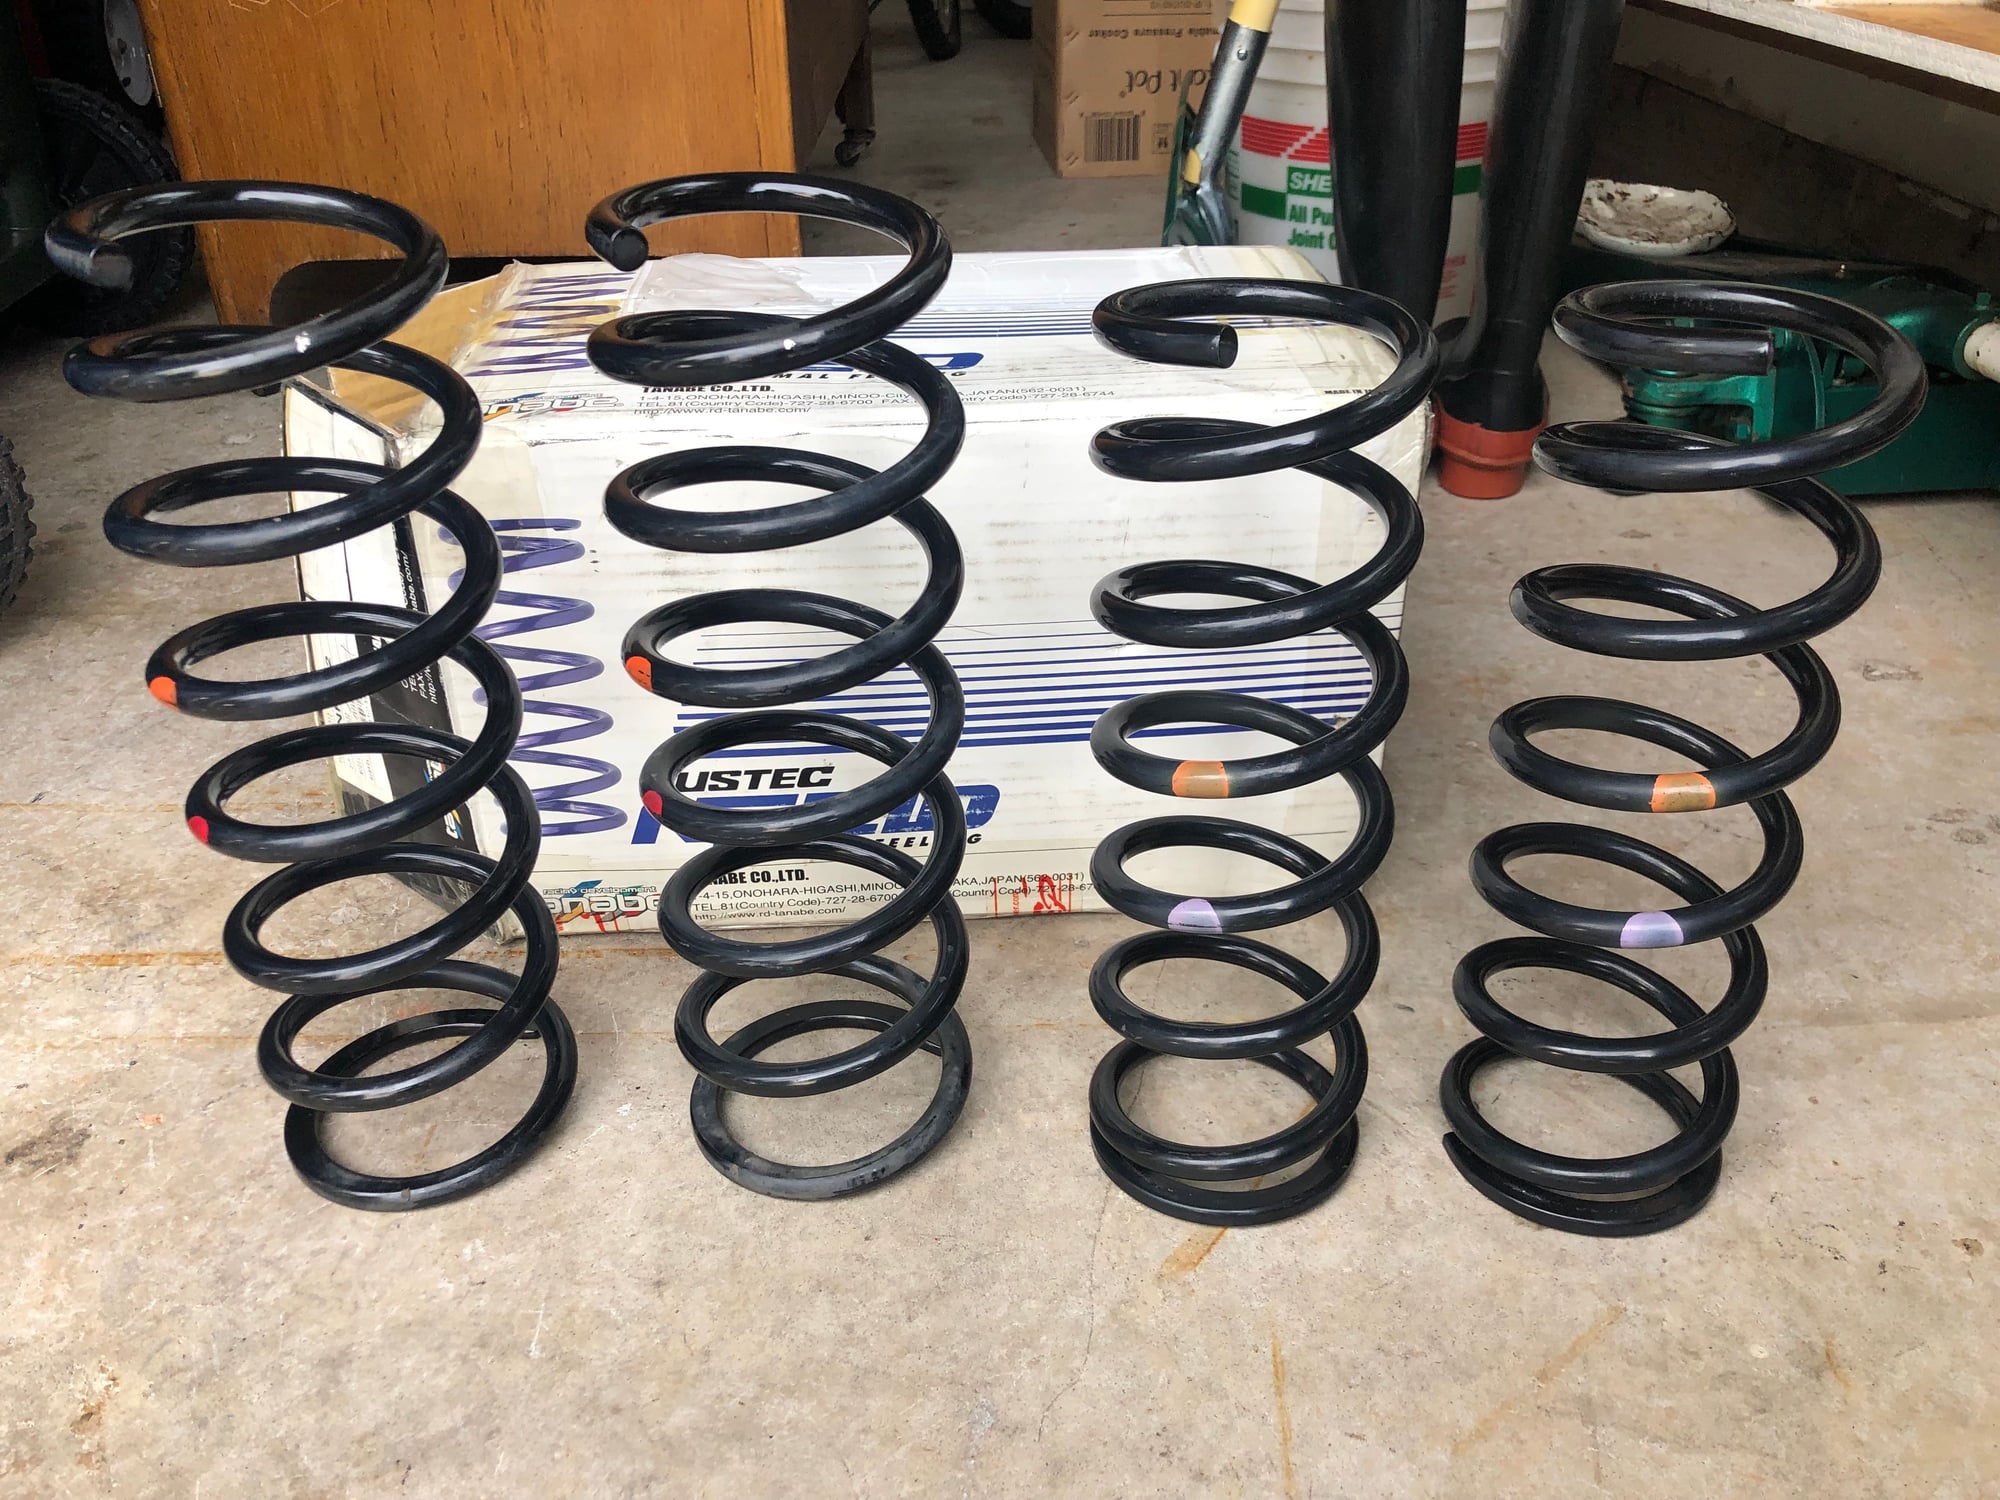 Steering/Suspension - FS: 2006 Lexus GS300 AWD Factory Springs - Used - 2006 to 2011 Lexus GS300 - Centreville, VA 20124, United States